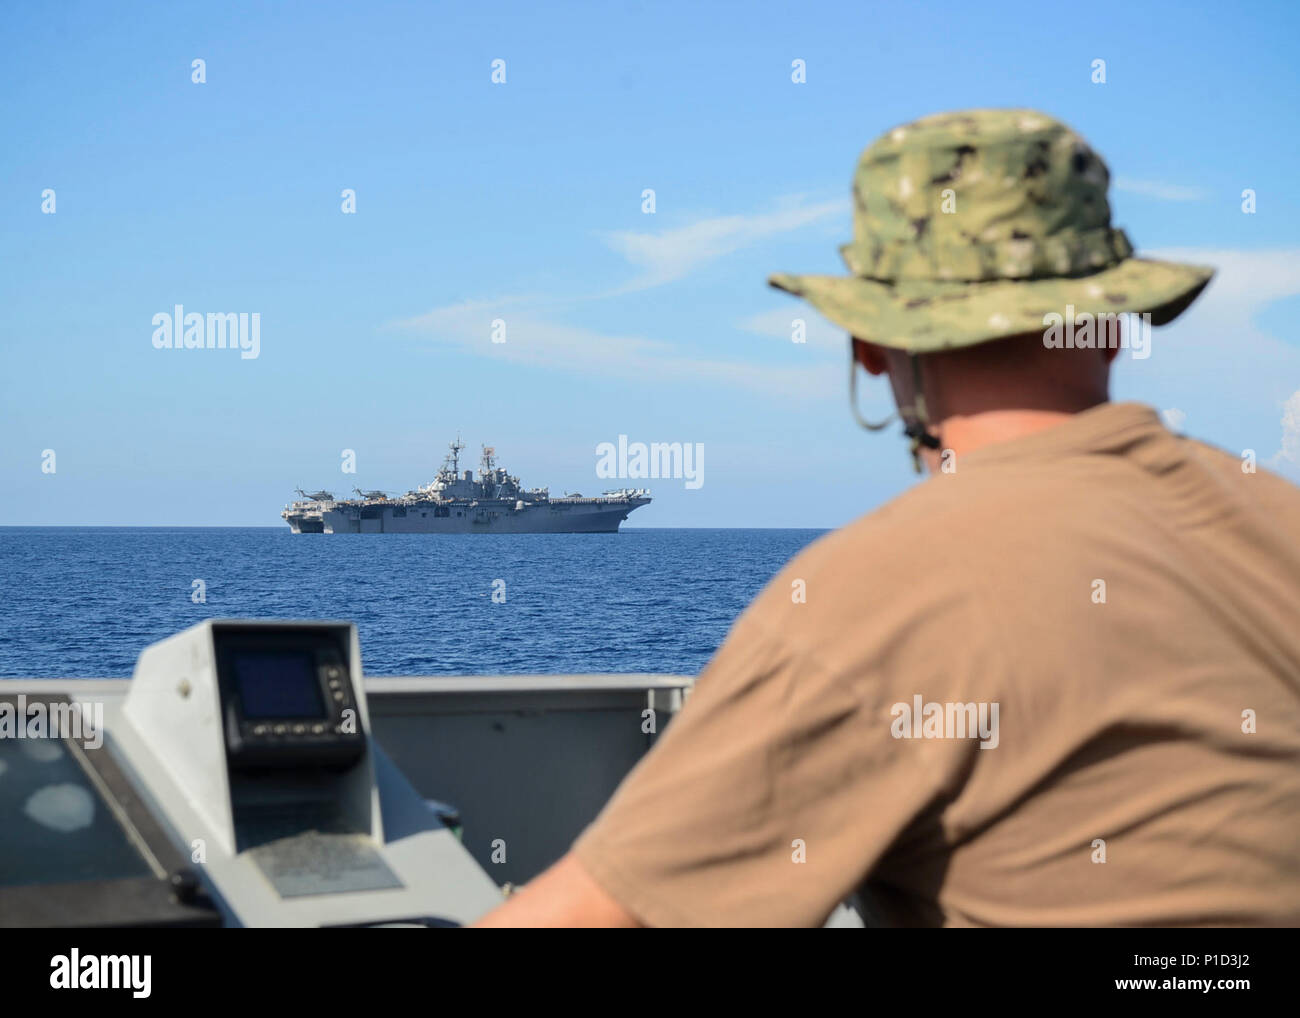 161013-N-RL456-0893 CARRIBEAN SEA (Oct. 13, 2016) Petty Officer 1st Class Imre Balazsi, attached to Assault Craft Unit 2 observes the approach to the amphibious assault ship USS Iwo Jima (LHD 7) from landing craft utility (LCU) 1643. Iwo Jima and the 24th Marine Expeditionary Unit are underway to provide disaster relief and humanitarian aid to Haiti following Hurricane Matthew. (U.S. Navy photo by Petty Officer 2nd Class Hunter S. Harwell/Released) Stock Photo